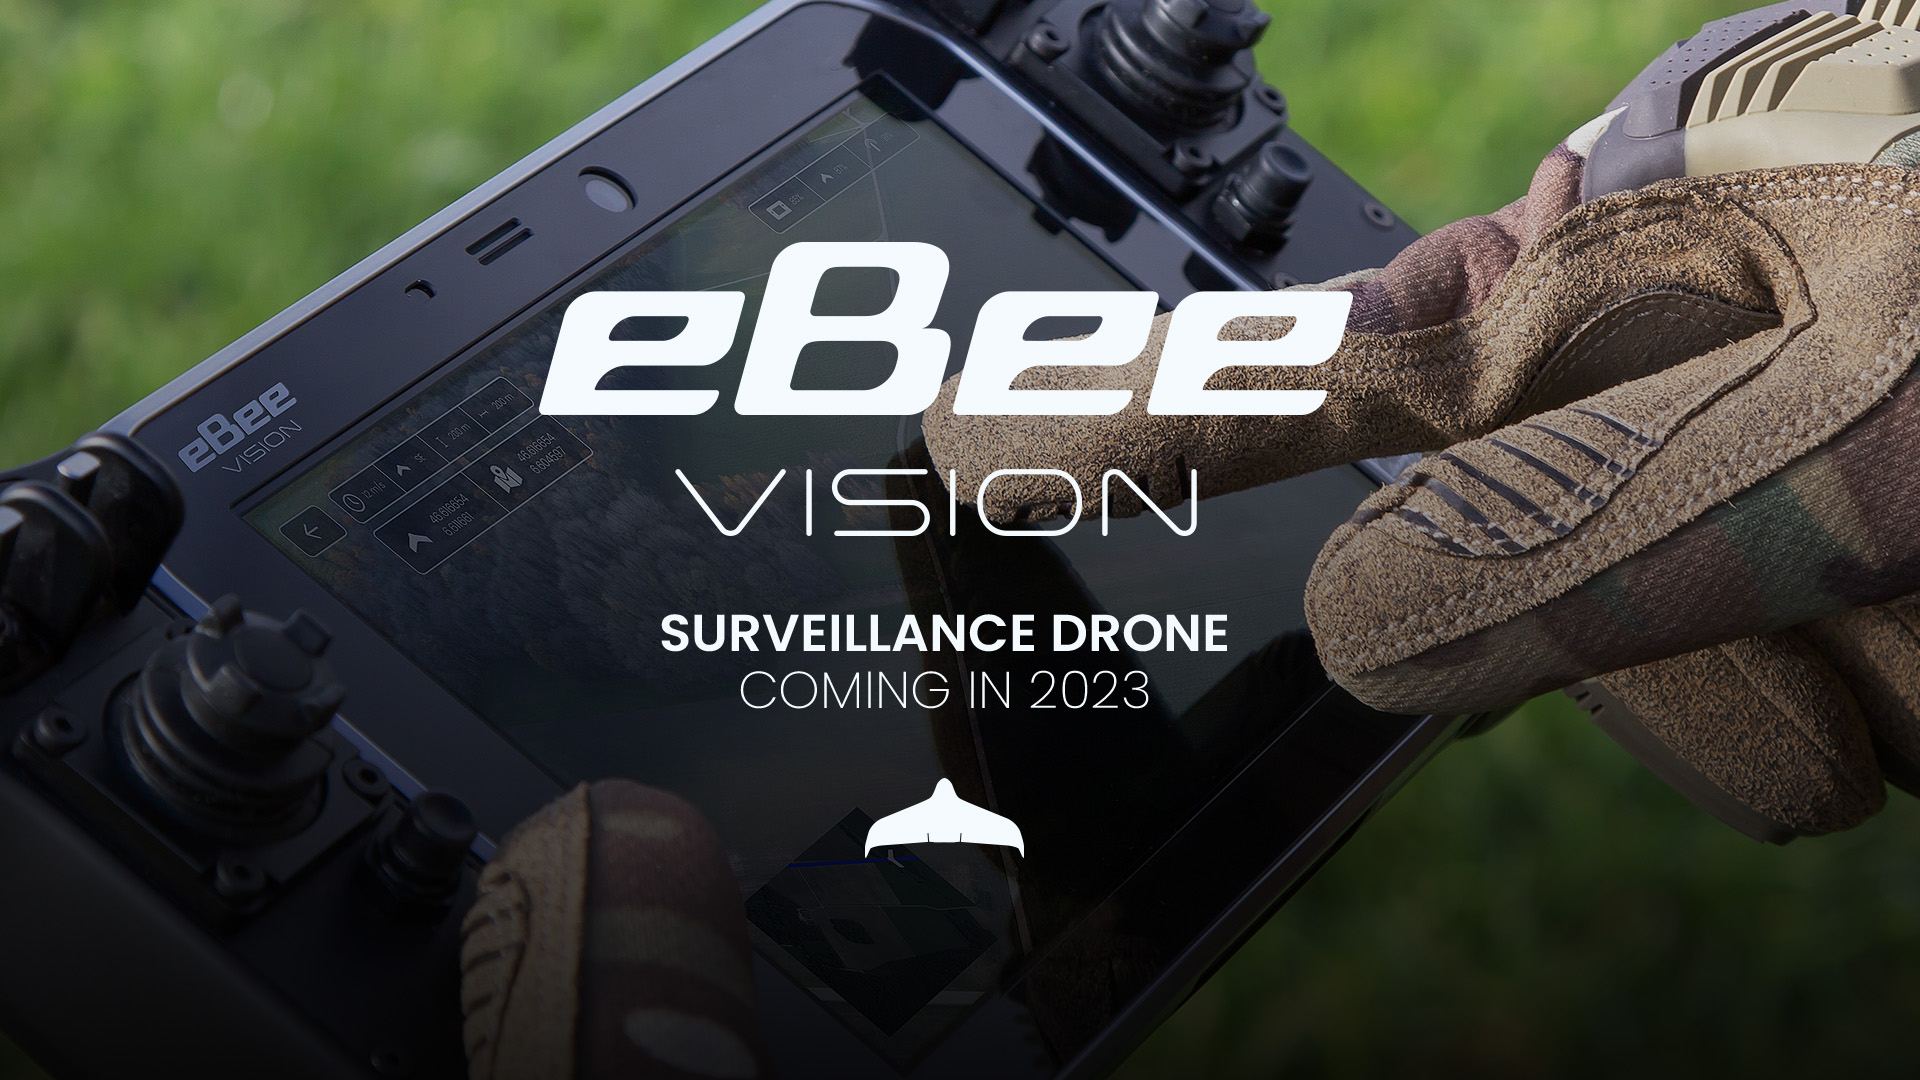 Mening Formen Undtagelse New eBee drone with 12-mile live video range to release in 2023